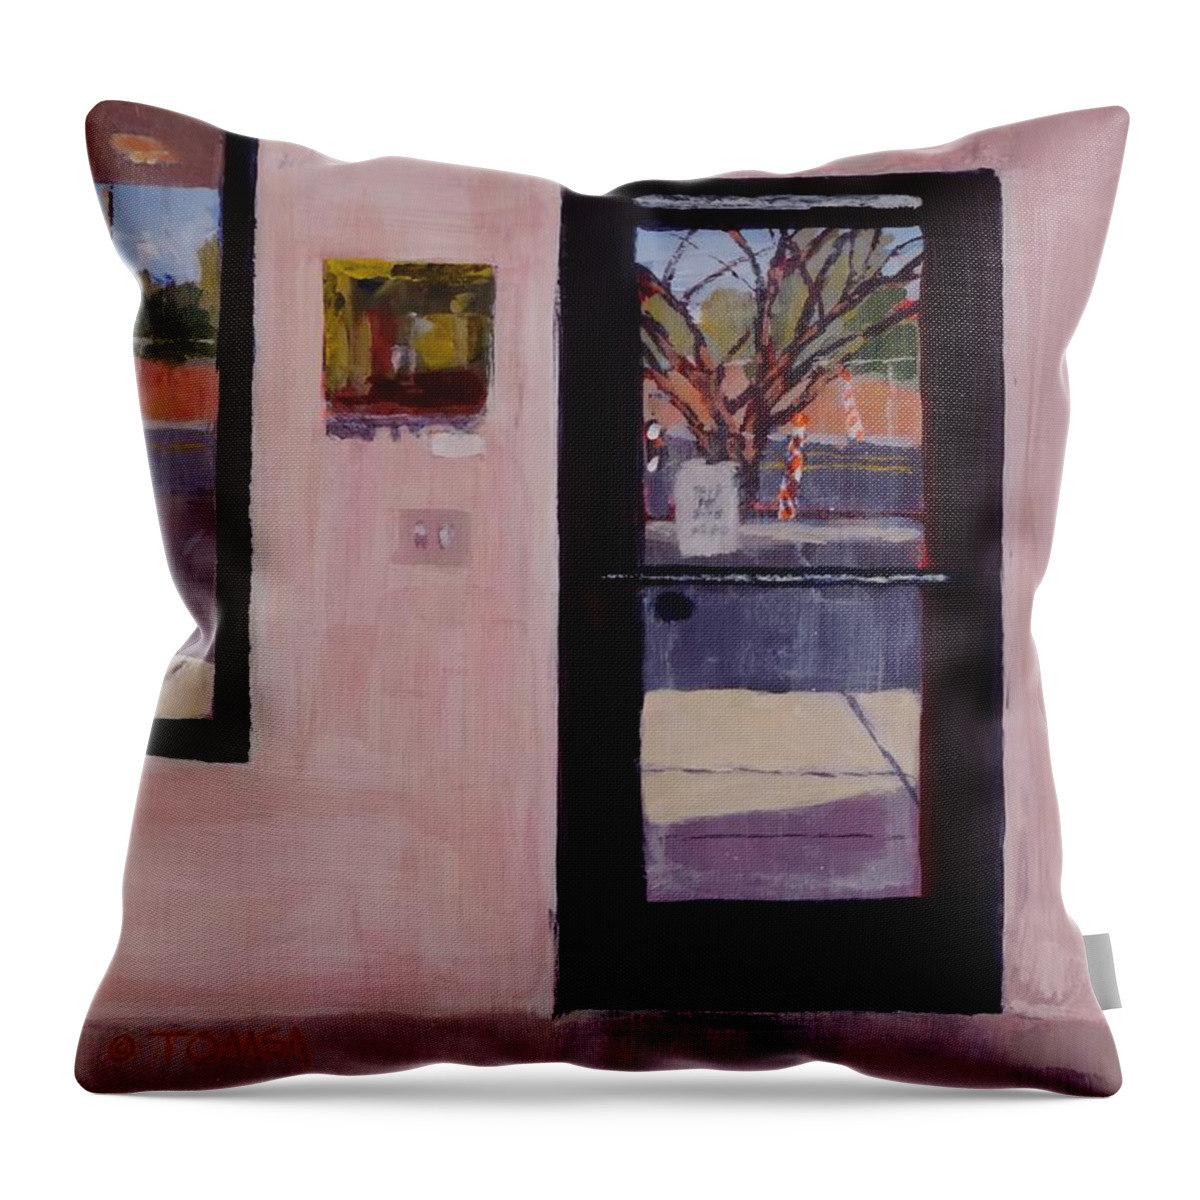 Art Gallery Exit Throw Pillow featuring the painting Art Gallery Exit by Bill Tomsa